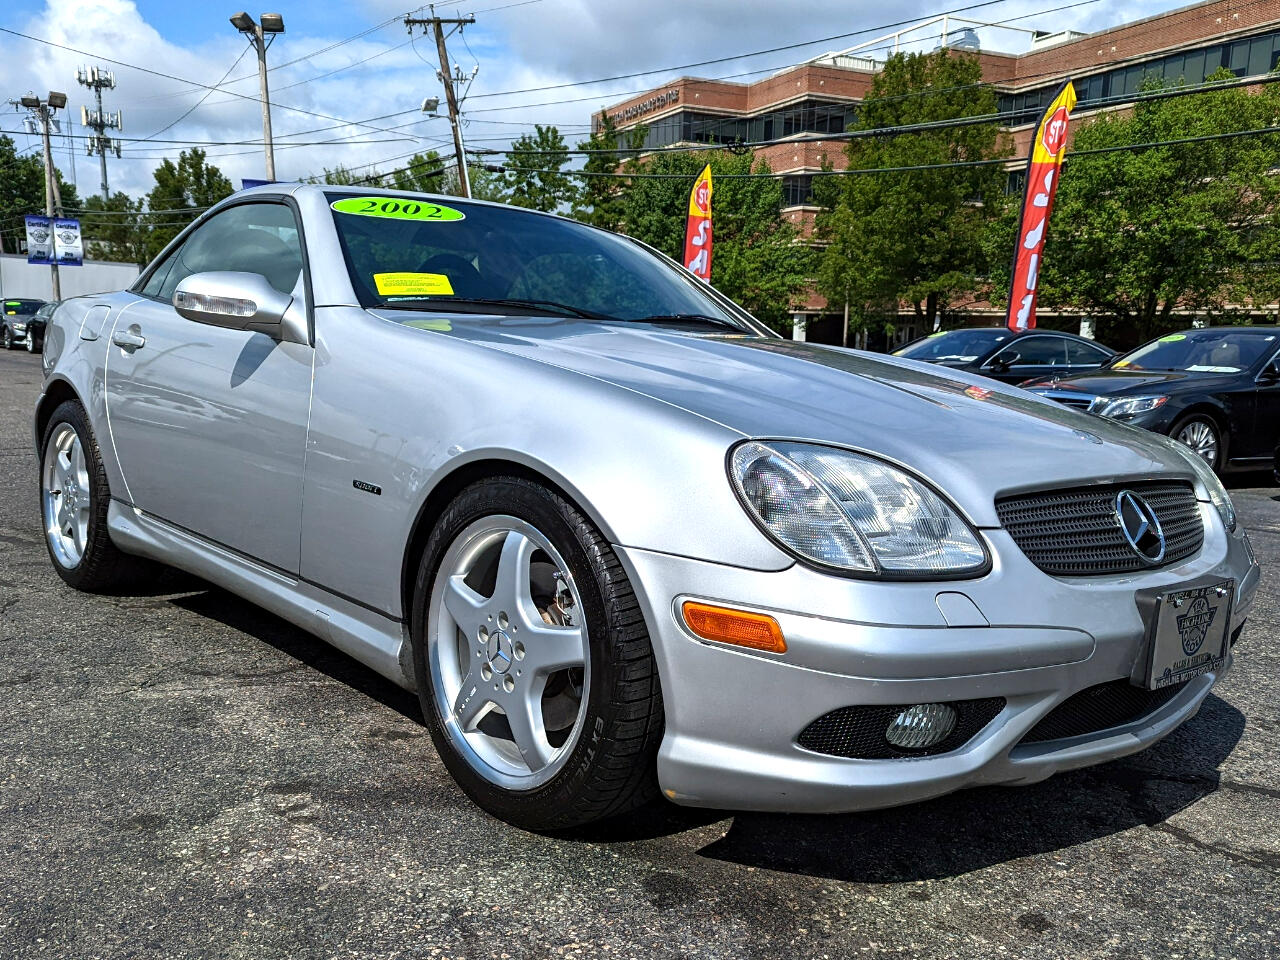 Used 2002 Mercedes-Benz SLK-Class 2dr Roadster 3.2L for Sale in Lowell MA  01851 The Highline Group